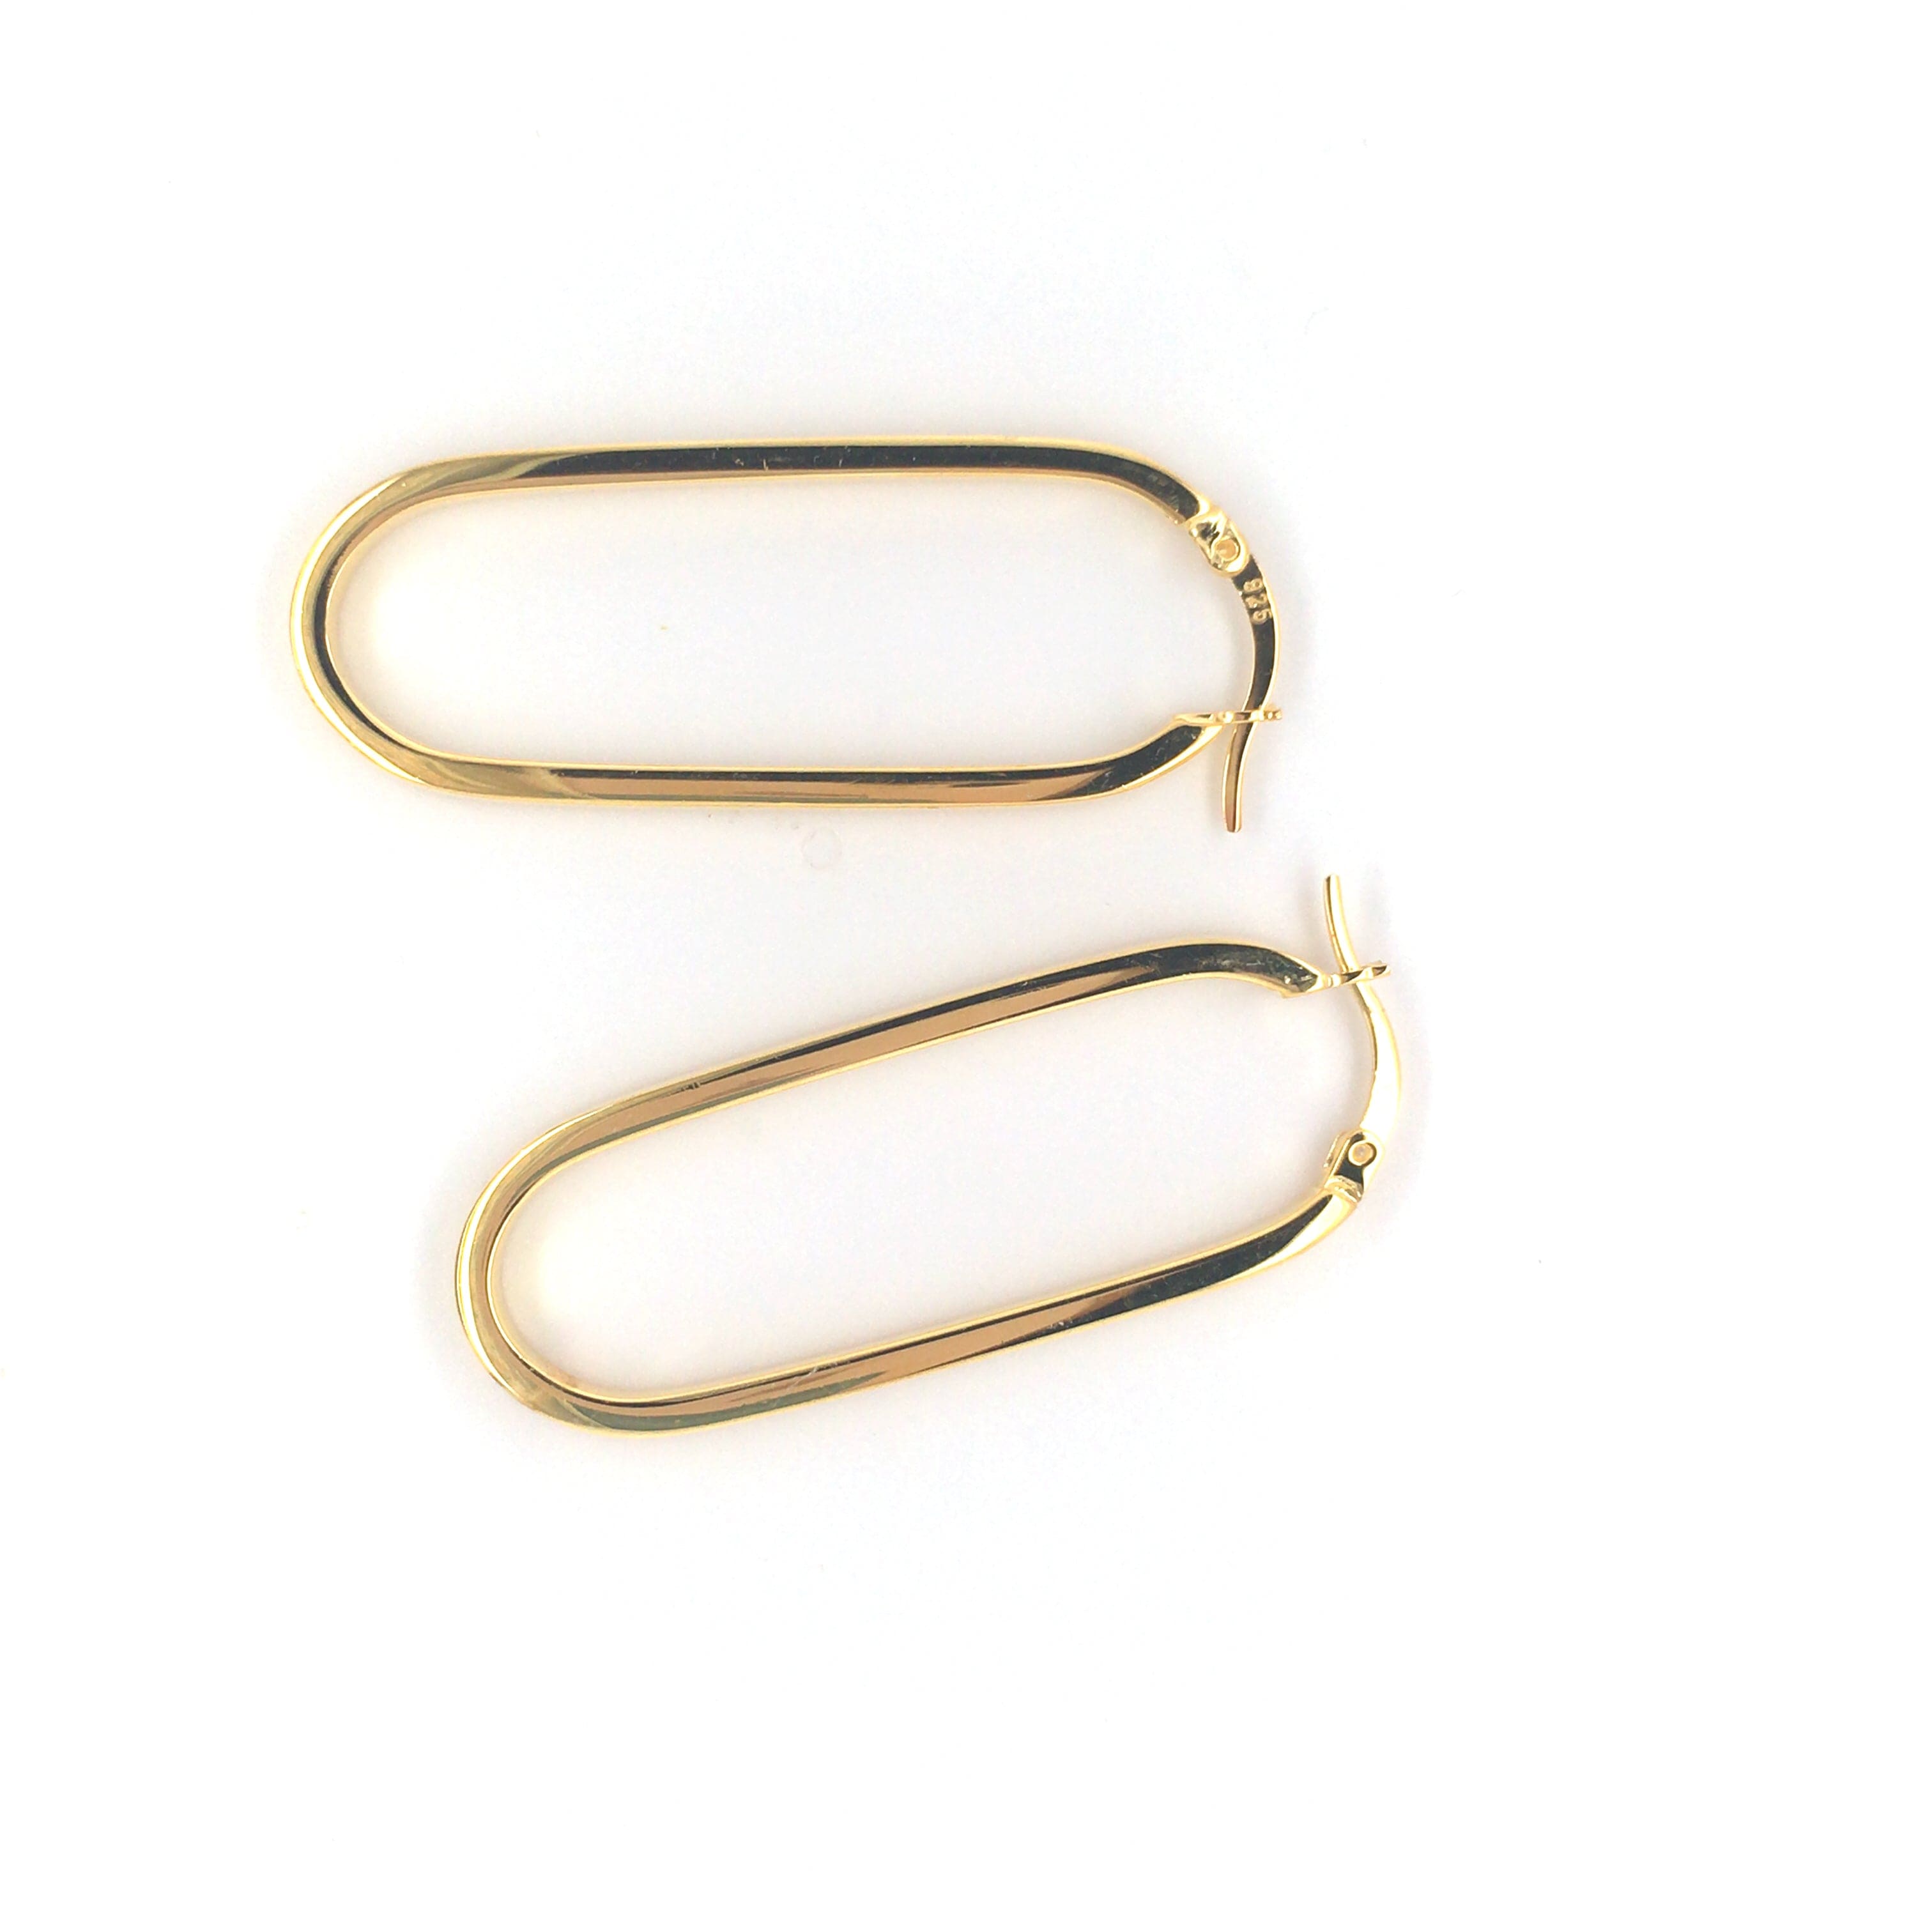 Lynora Silver Earring Gold Plated / Clear Lynora Sterling Silver Elongated Gold Hoop Earrings